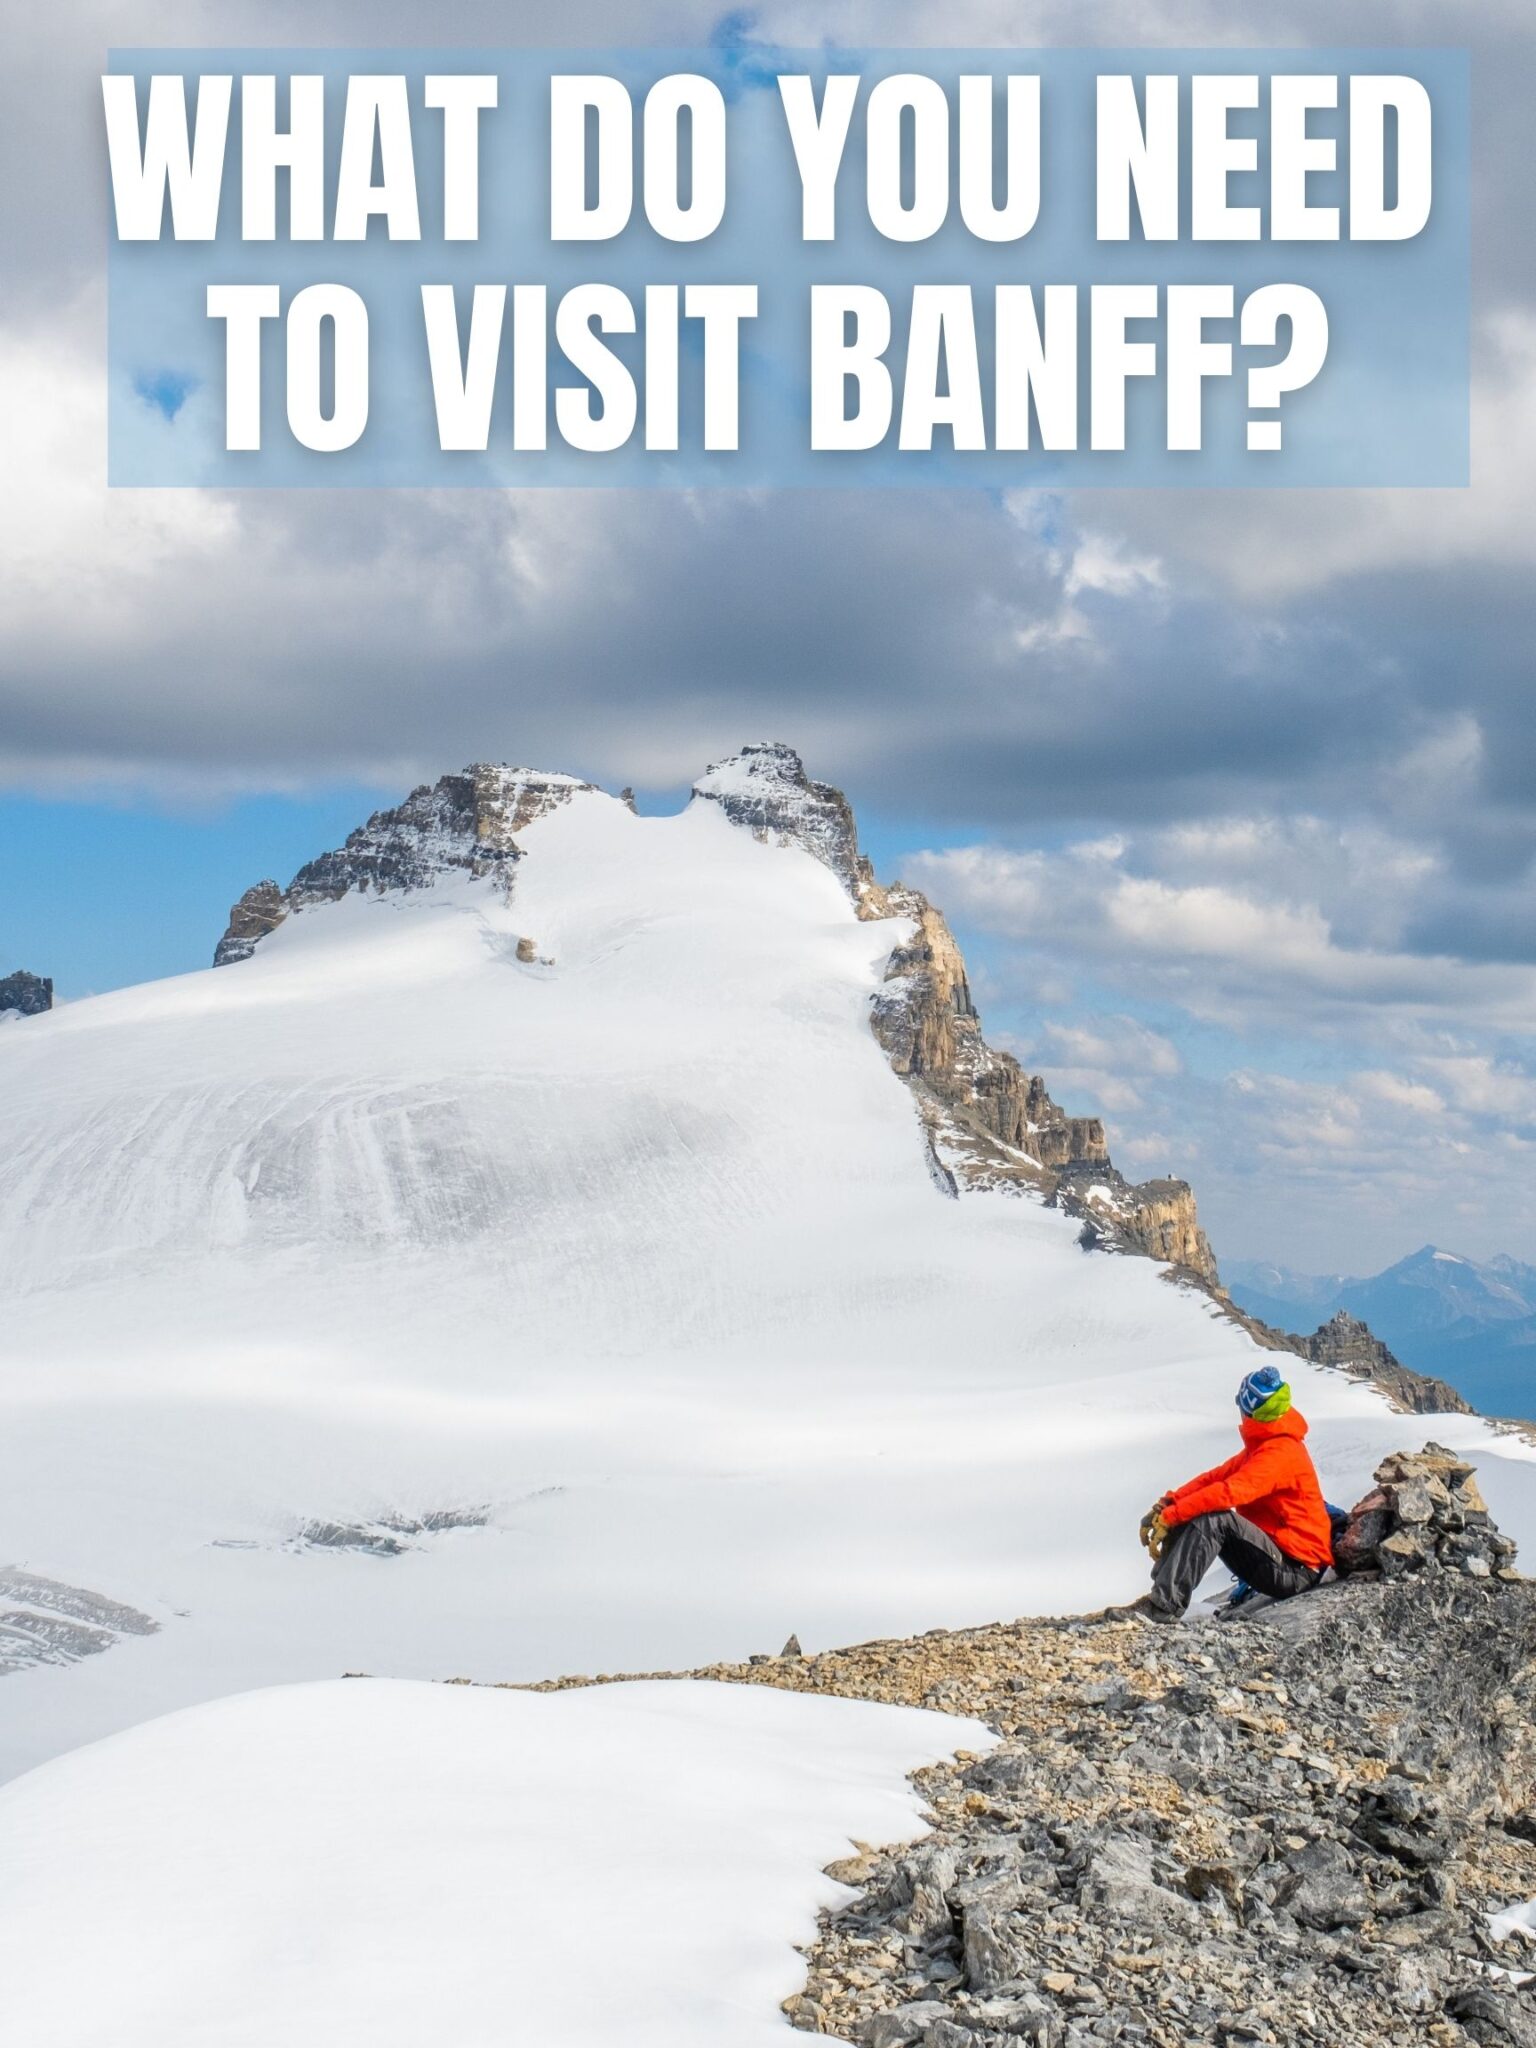 Banff FREQUENTLY Asked Questions